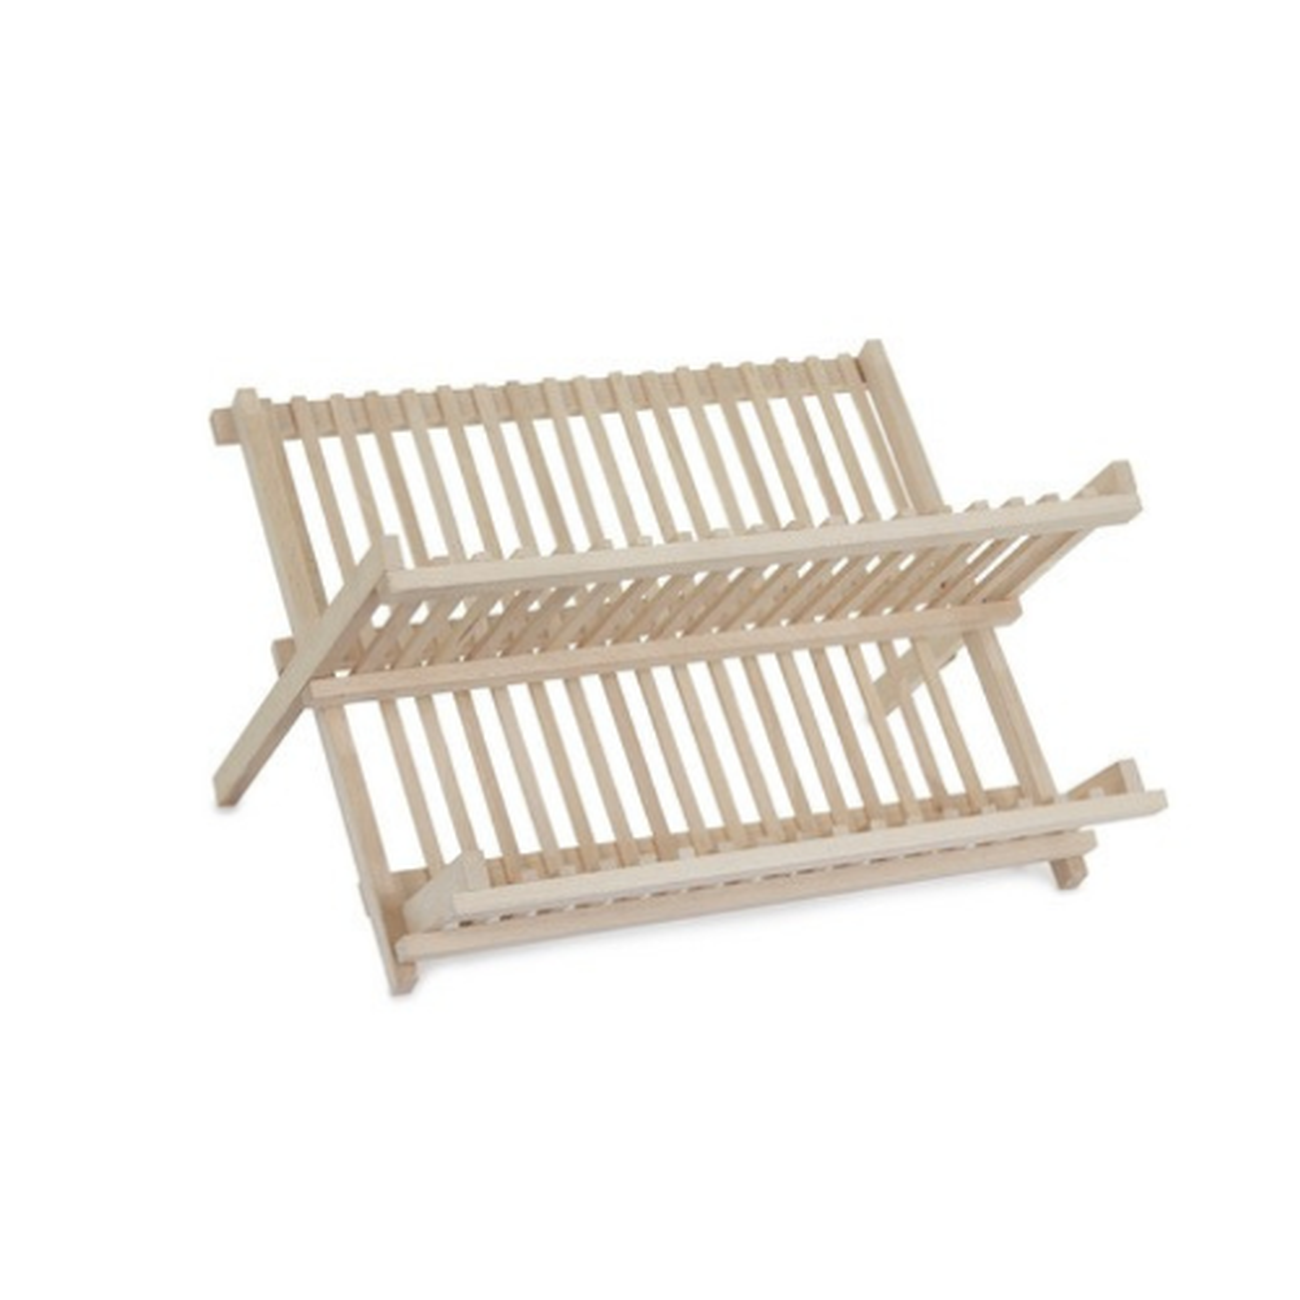 https://www.thekitchenwhisk.ie/contentFiles/productImages/Large/apollo-beech-dish-drainer.png